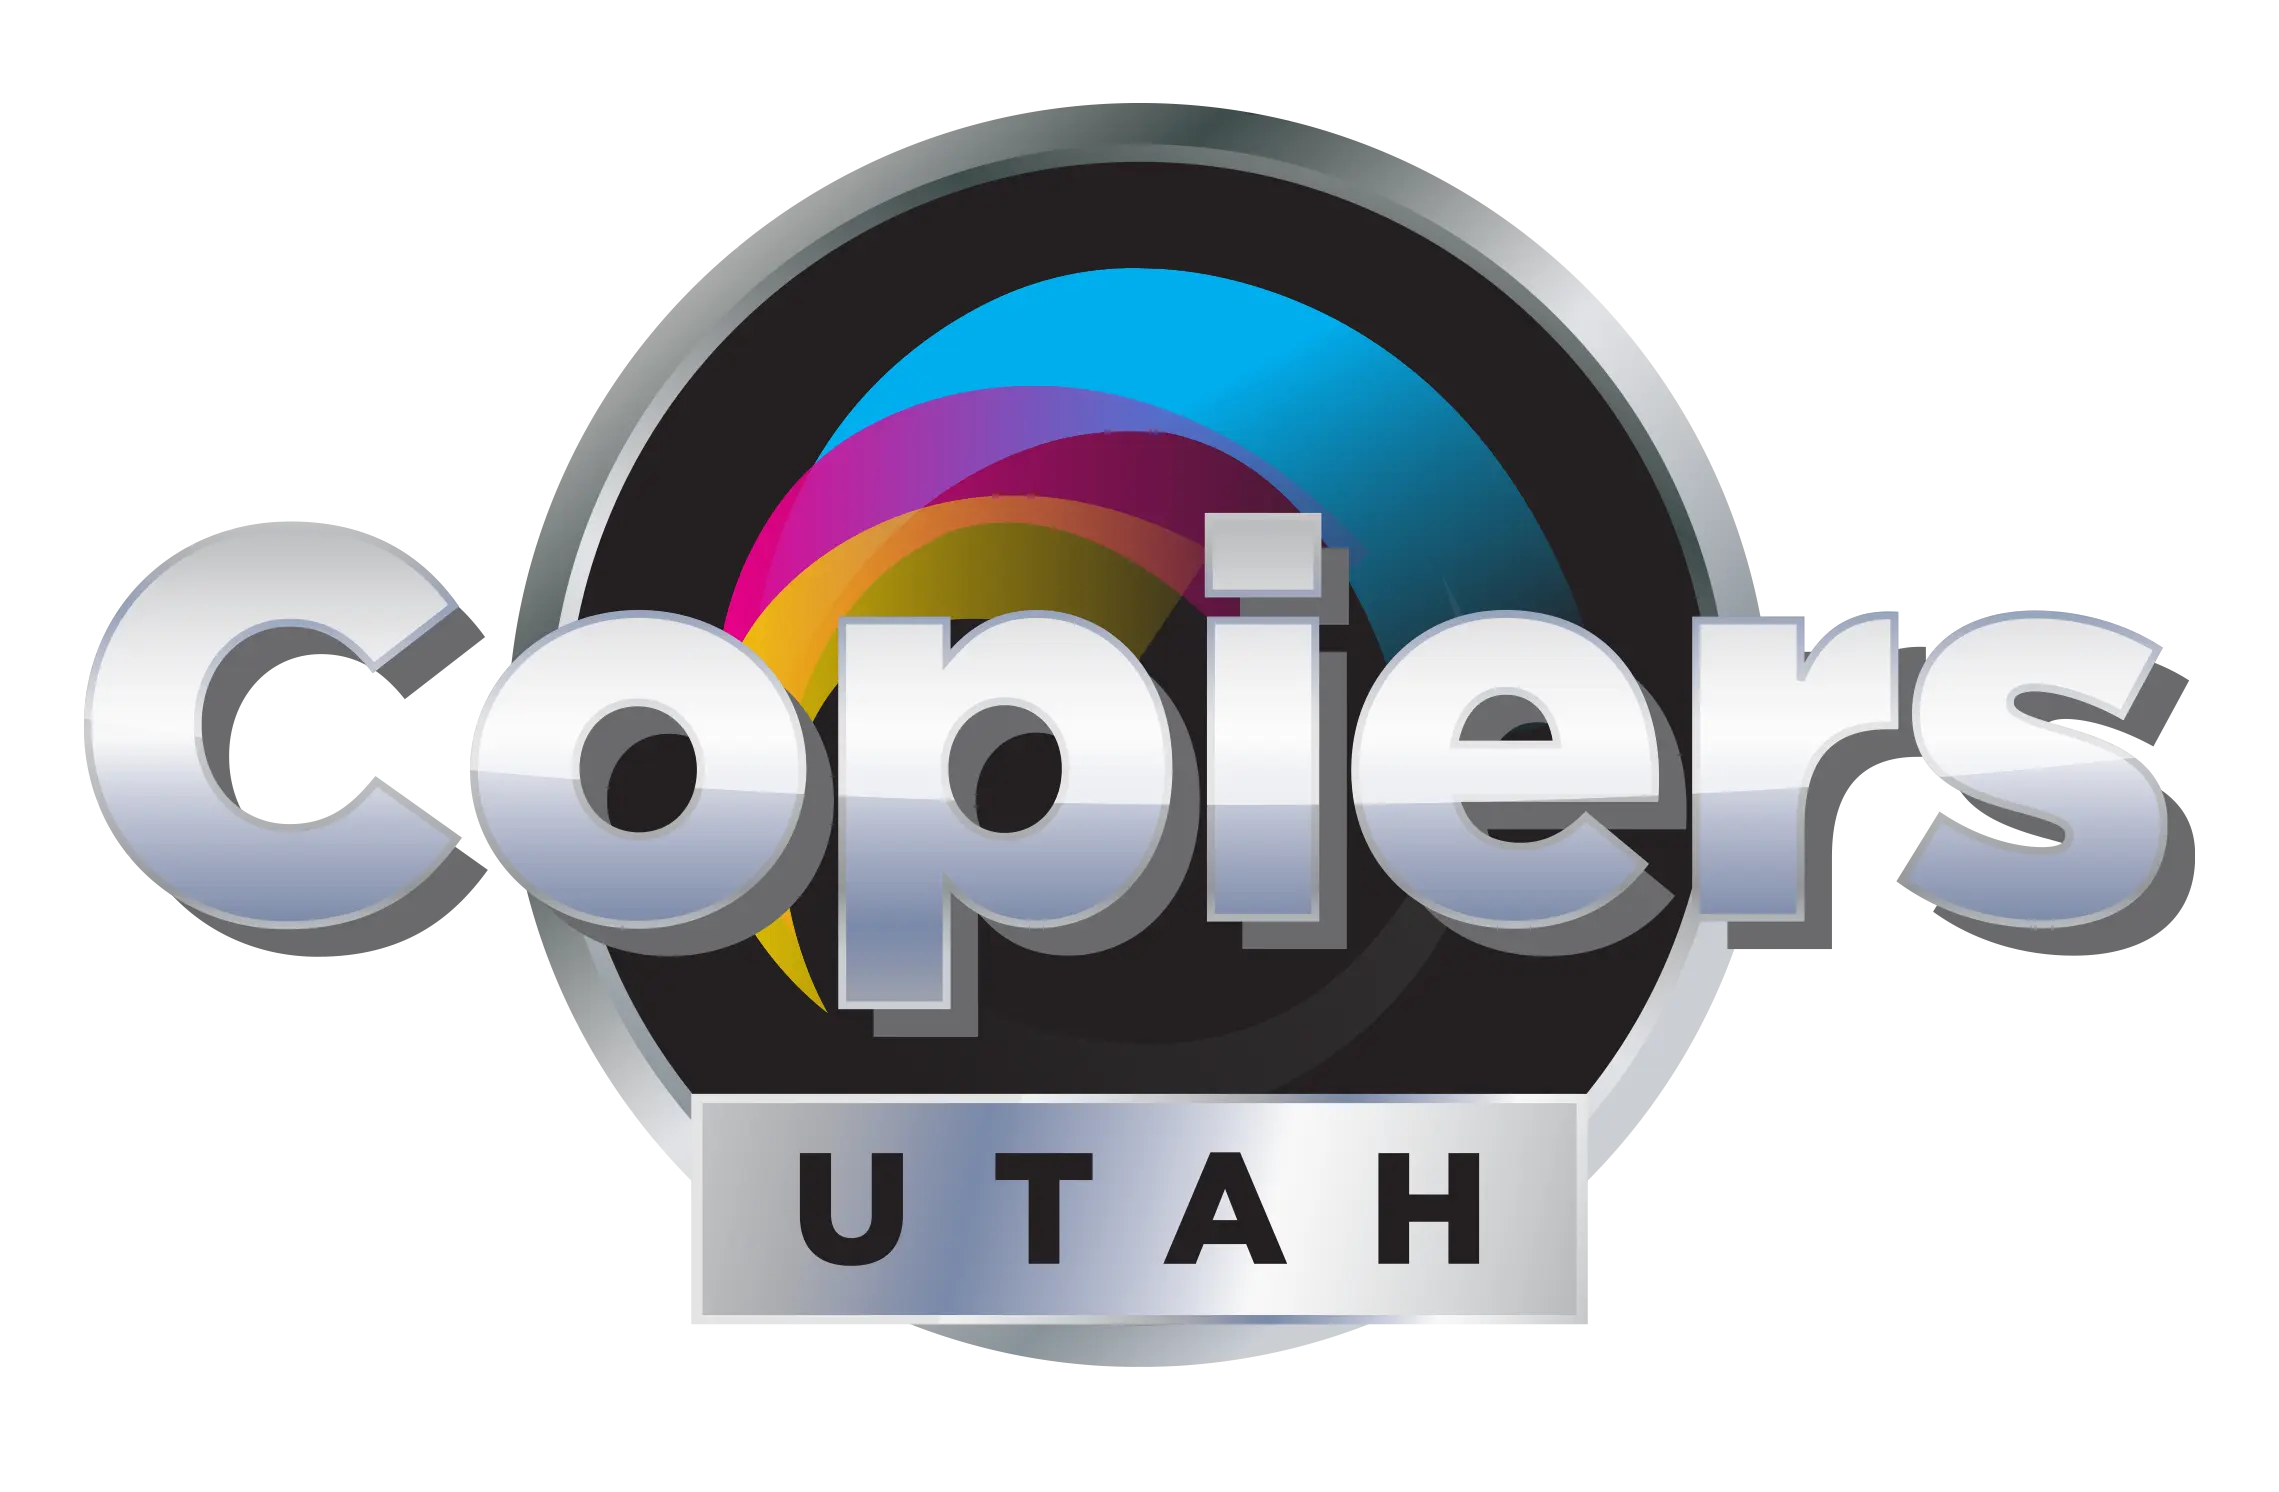 IT services provided by Copiers Utah